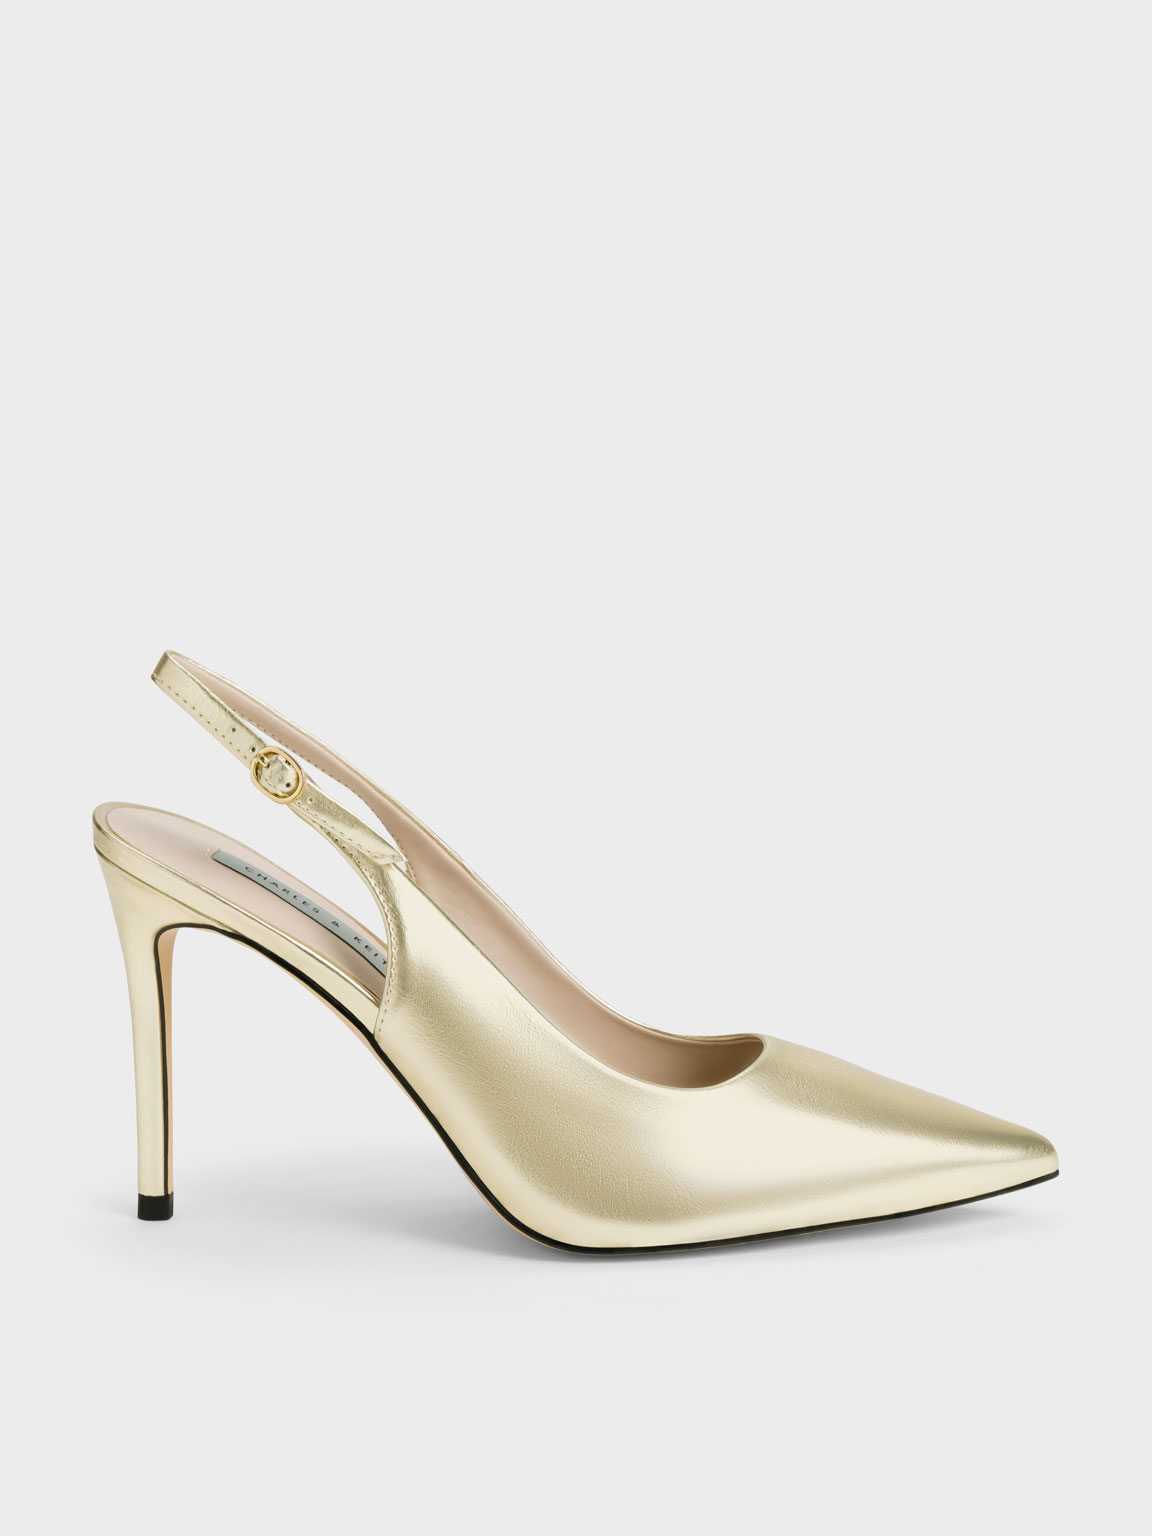 Gold Metallic Stiletto Heel Slingback Pumps - CHARLES & KEITH IN